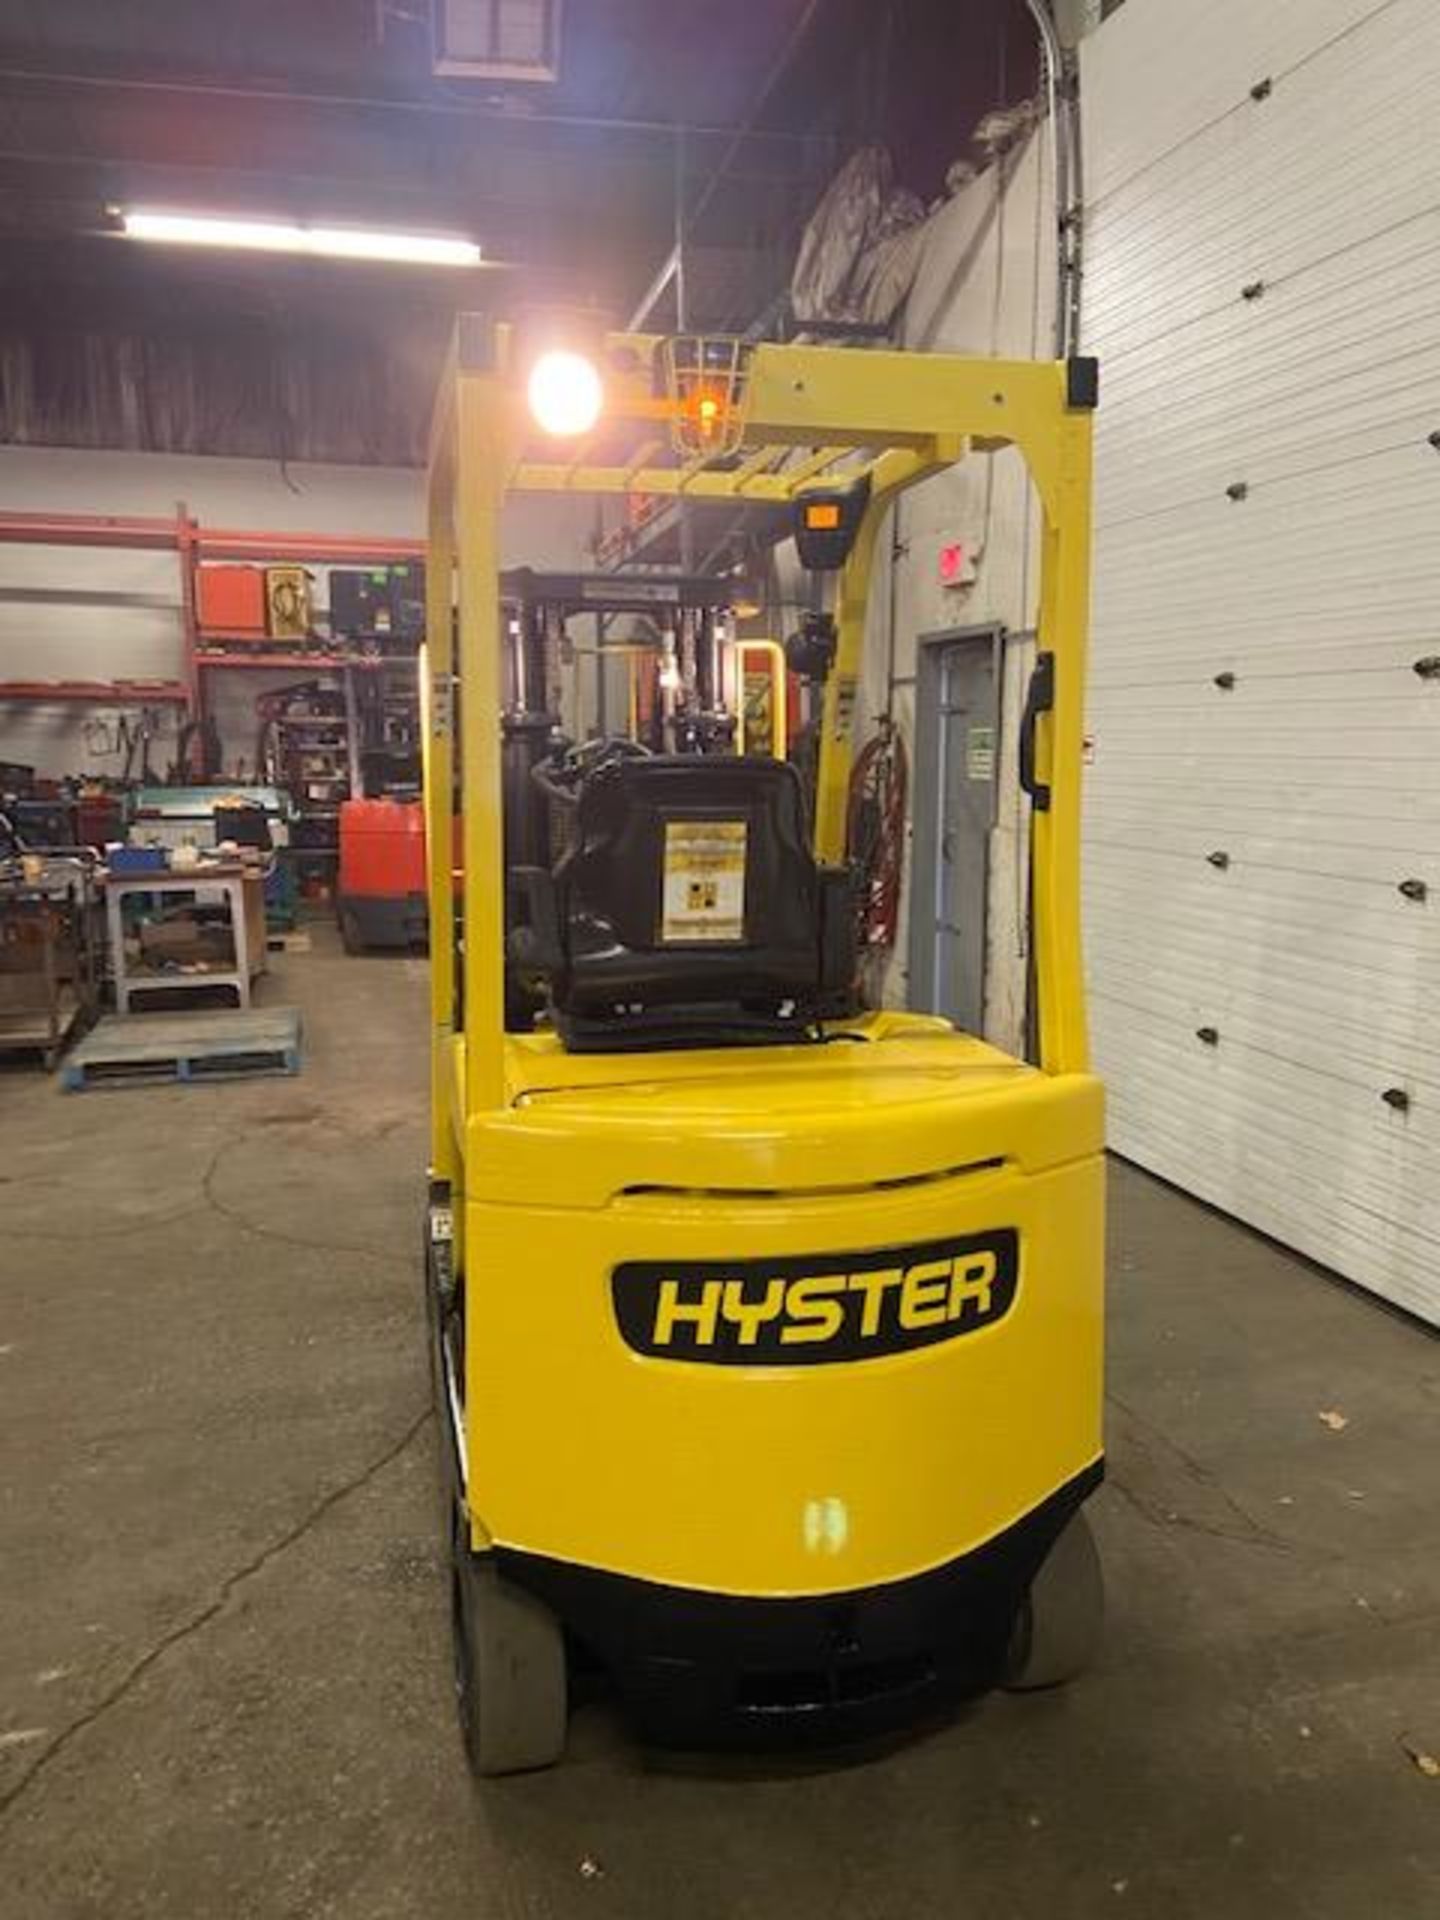 FREE CUSTOMS - 2011 Hyster 5000lbs Capacity Forklift Electric with 3-STAGE MAST sideshift MINT - Image 3 of 3